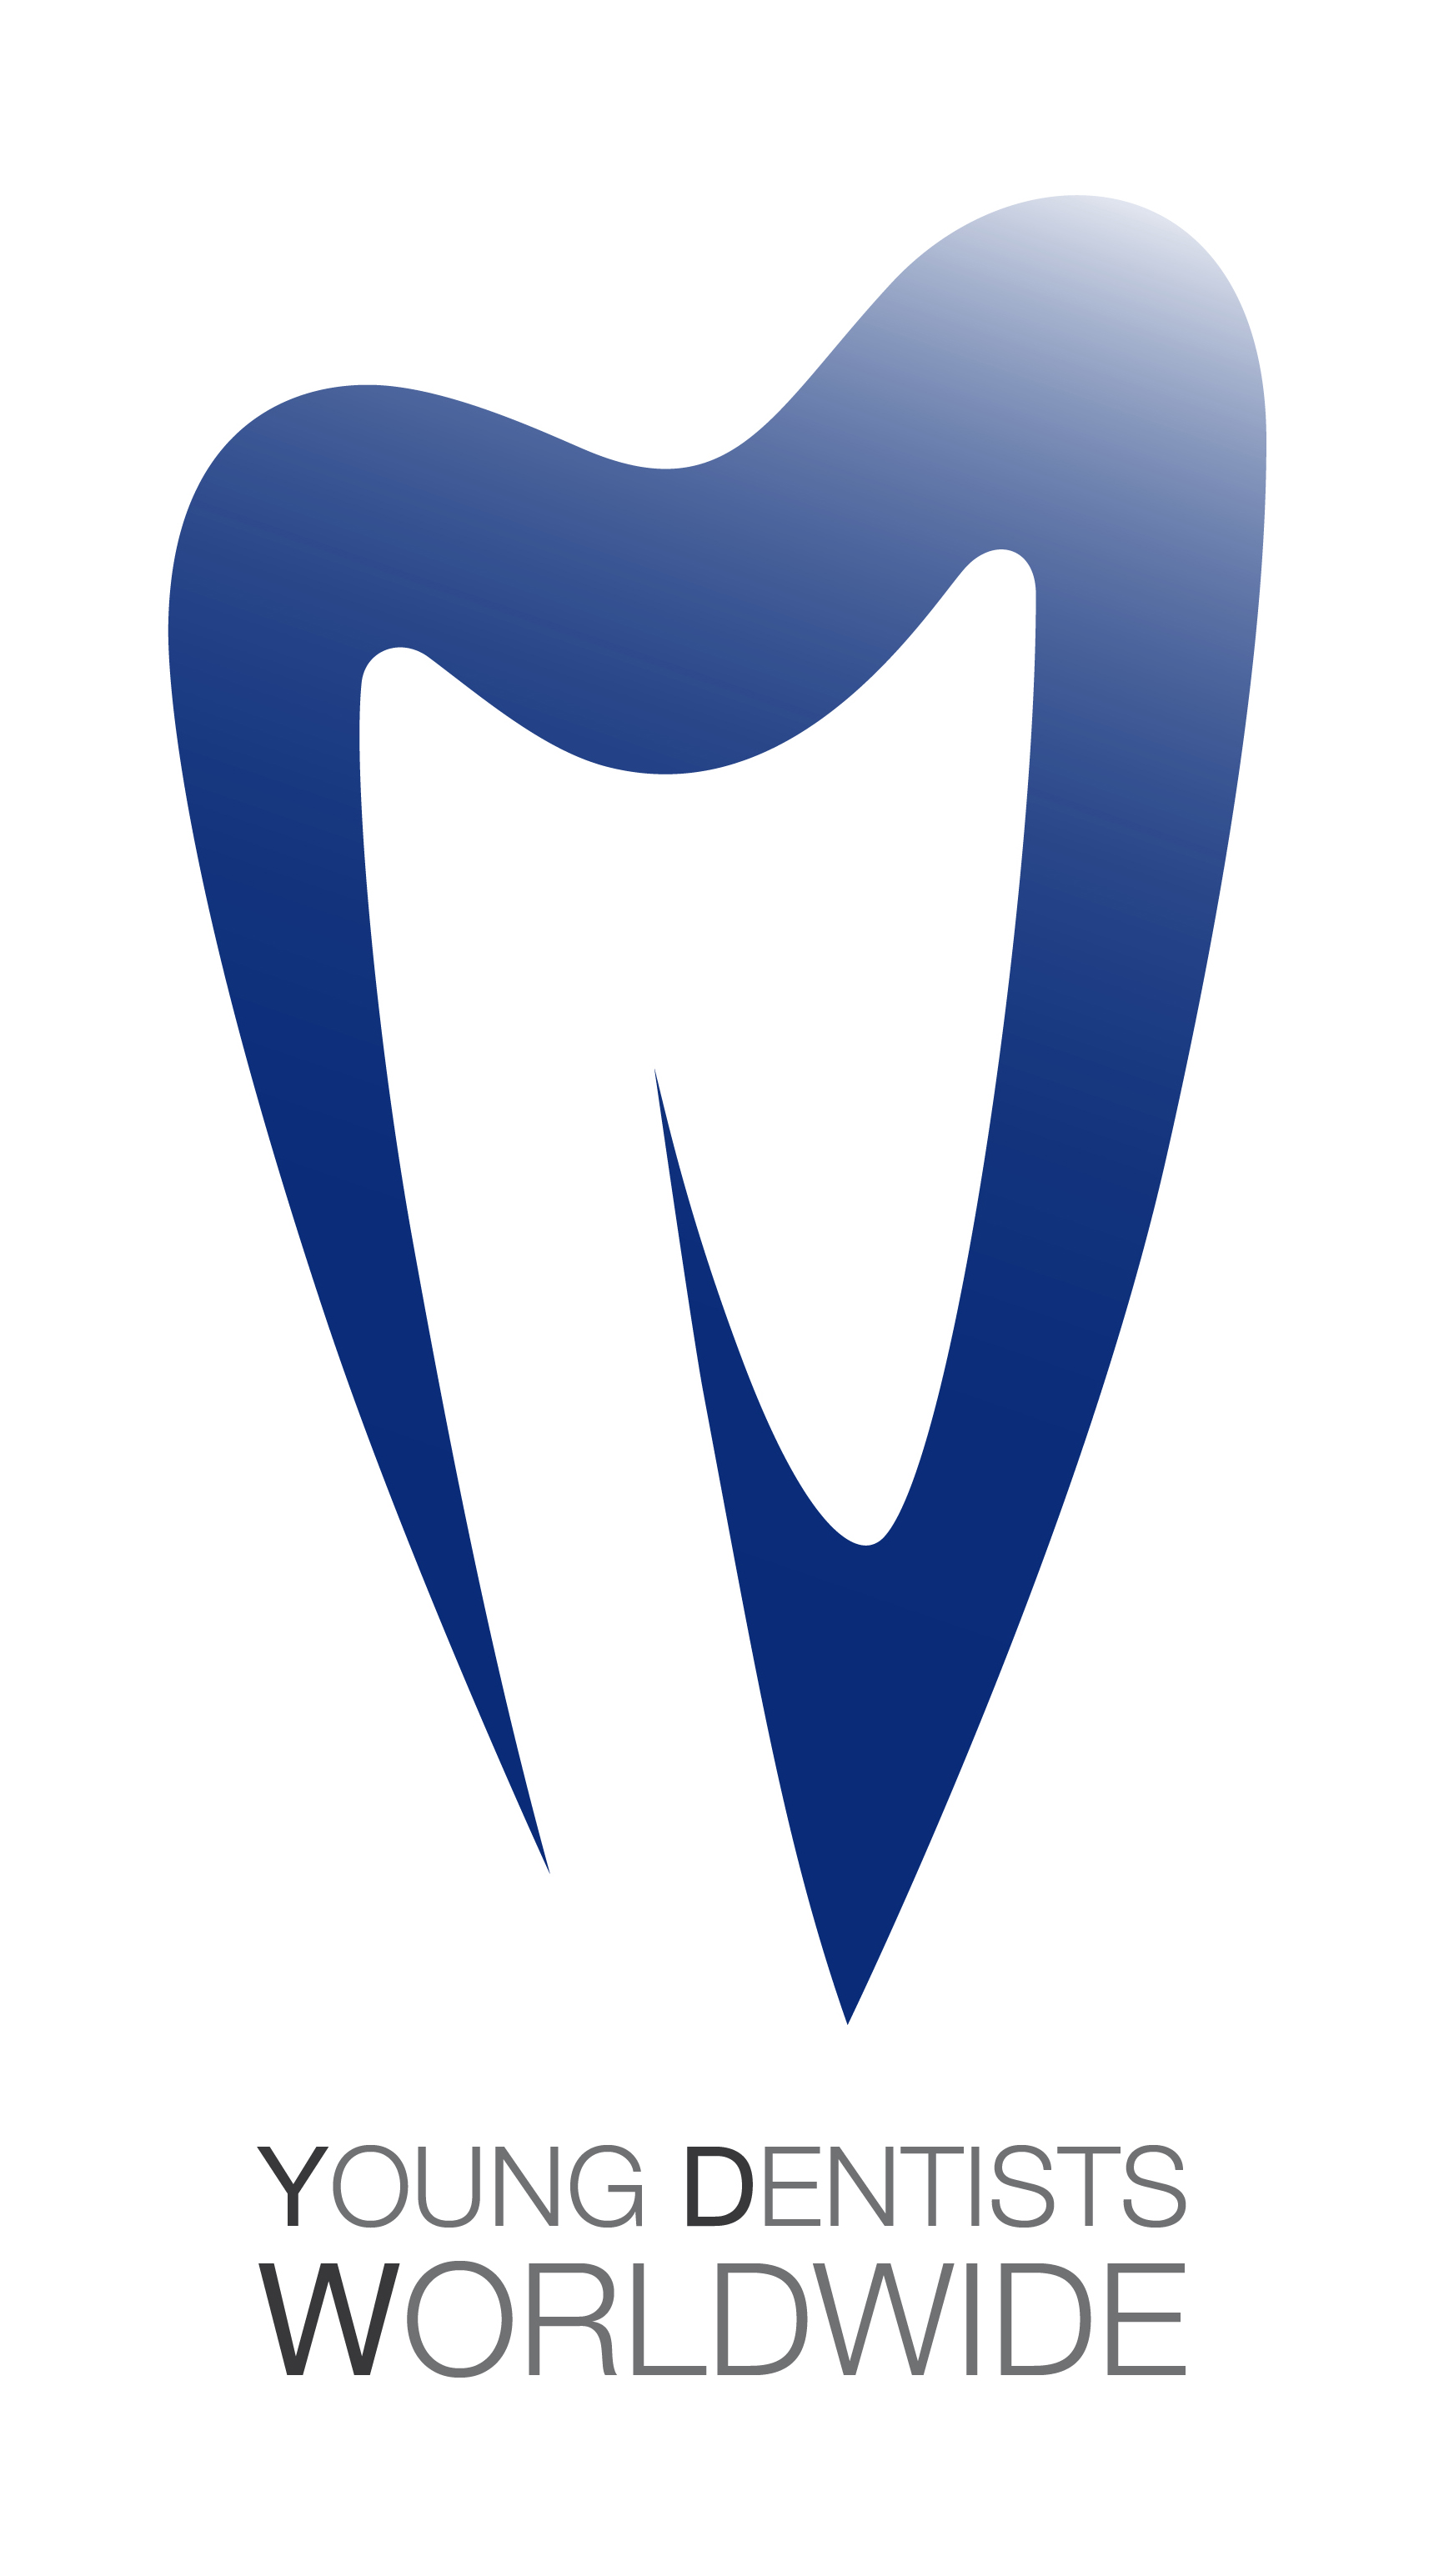 The official association that represent the young dentists worldwide